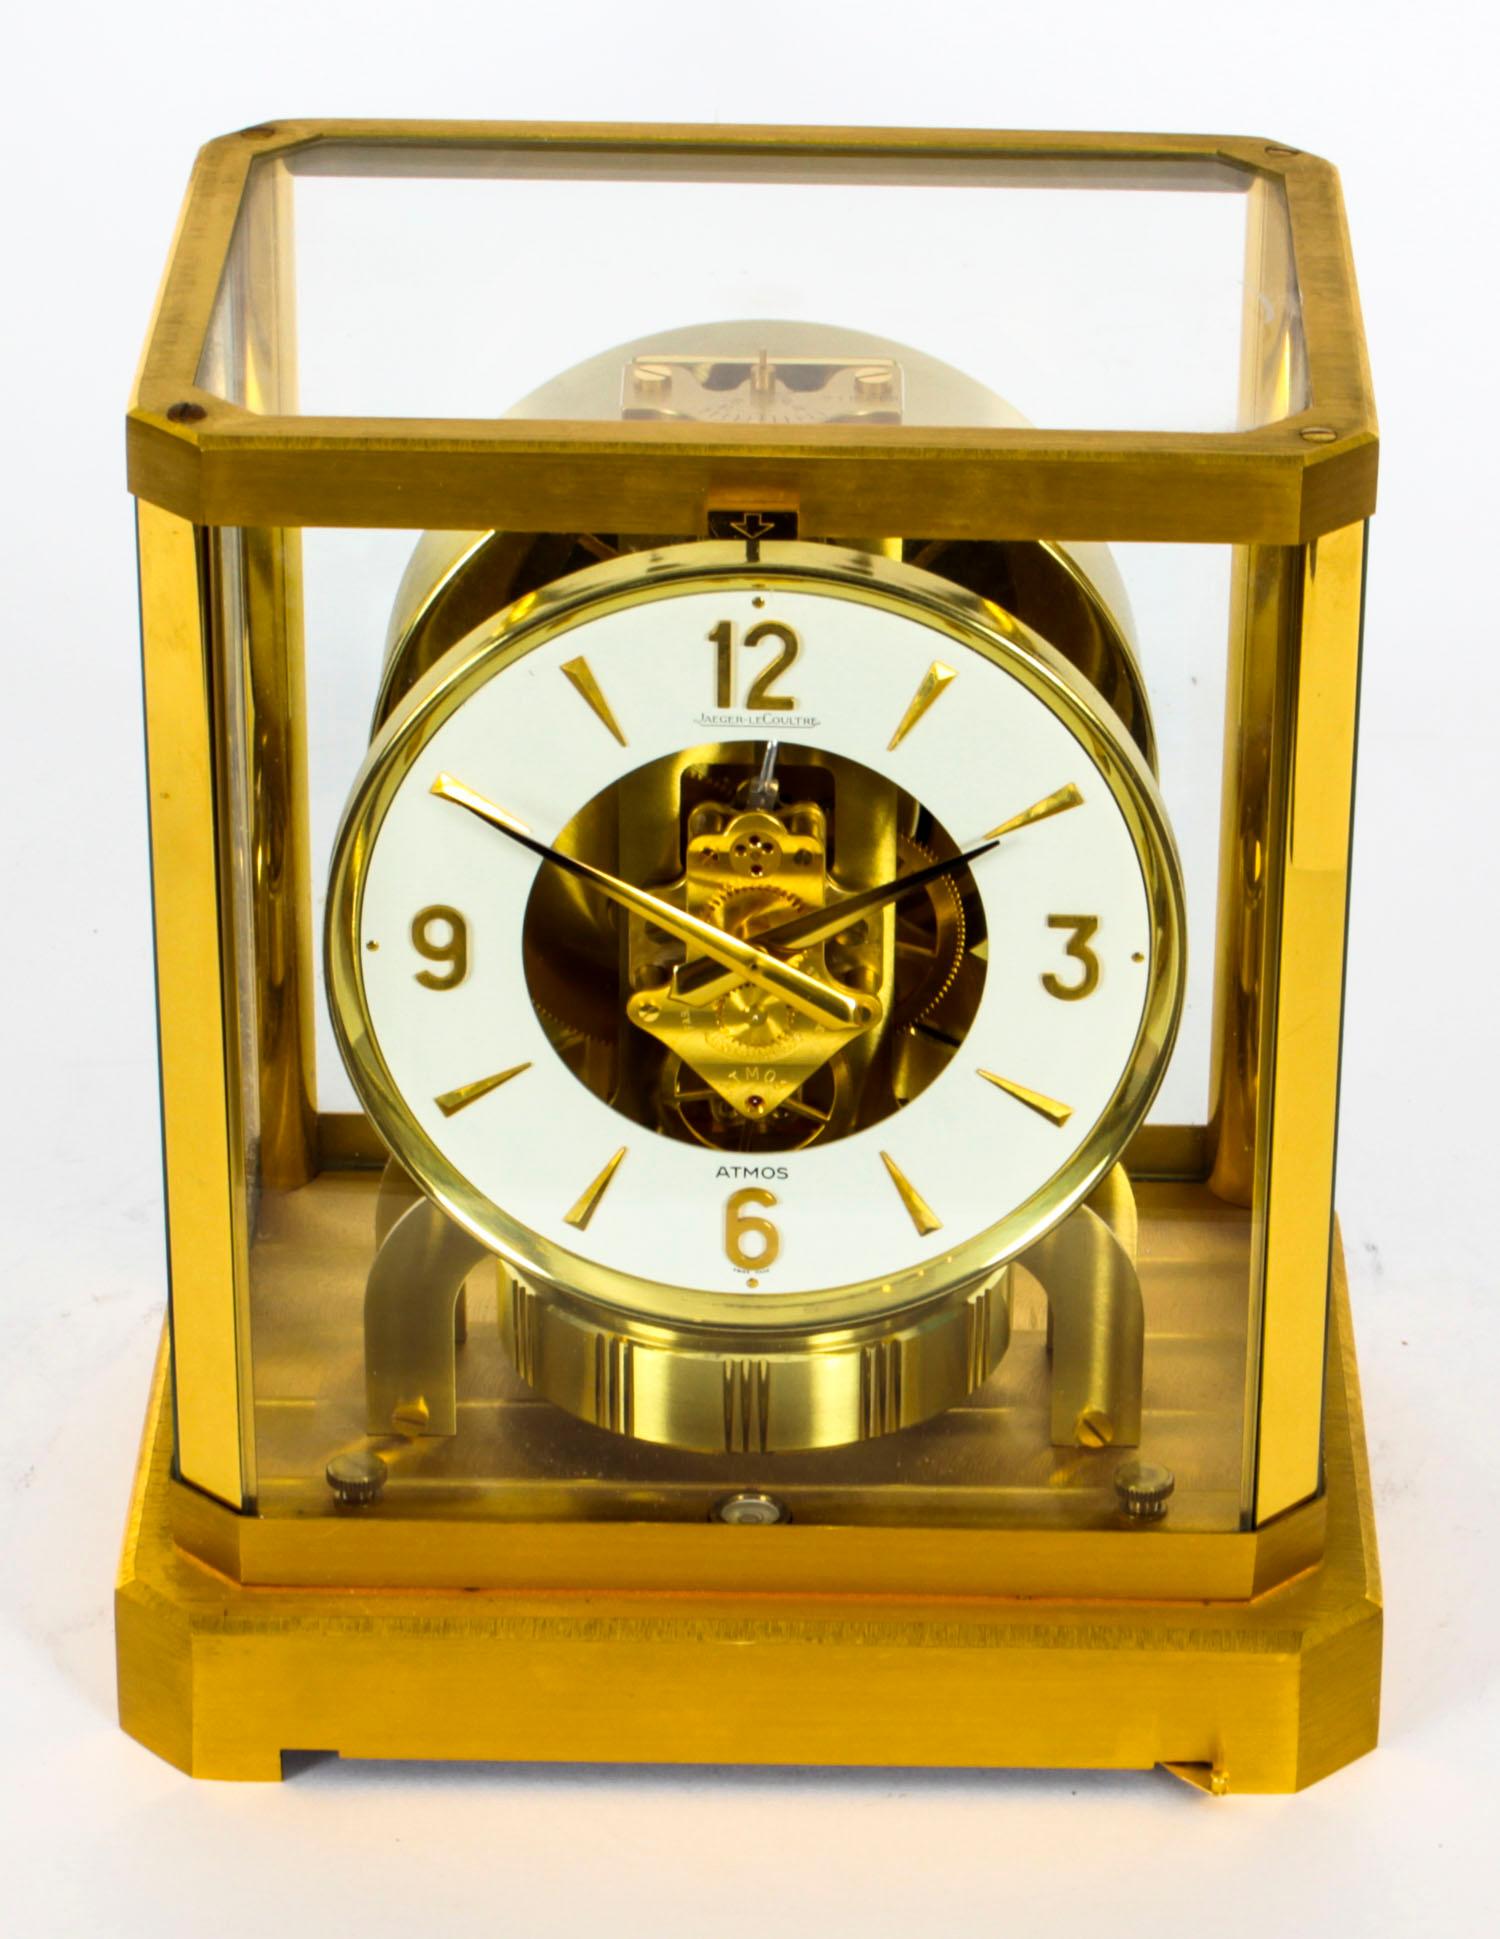 This is a very elegant Vintage Atmos perpetual mantle clock by Jaeger-LeCoultre, with a jewelled movement bearing their ref No. 218719 and dating from Circa 1970.

The clock is displayed in a polished gilt rectangular brass case with a removable